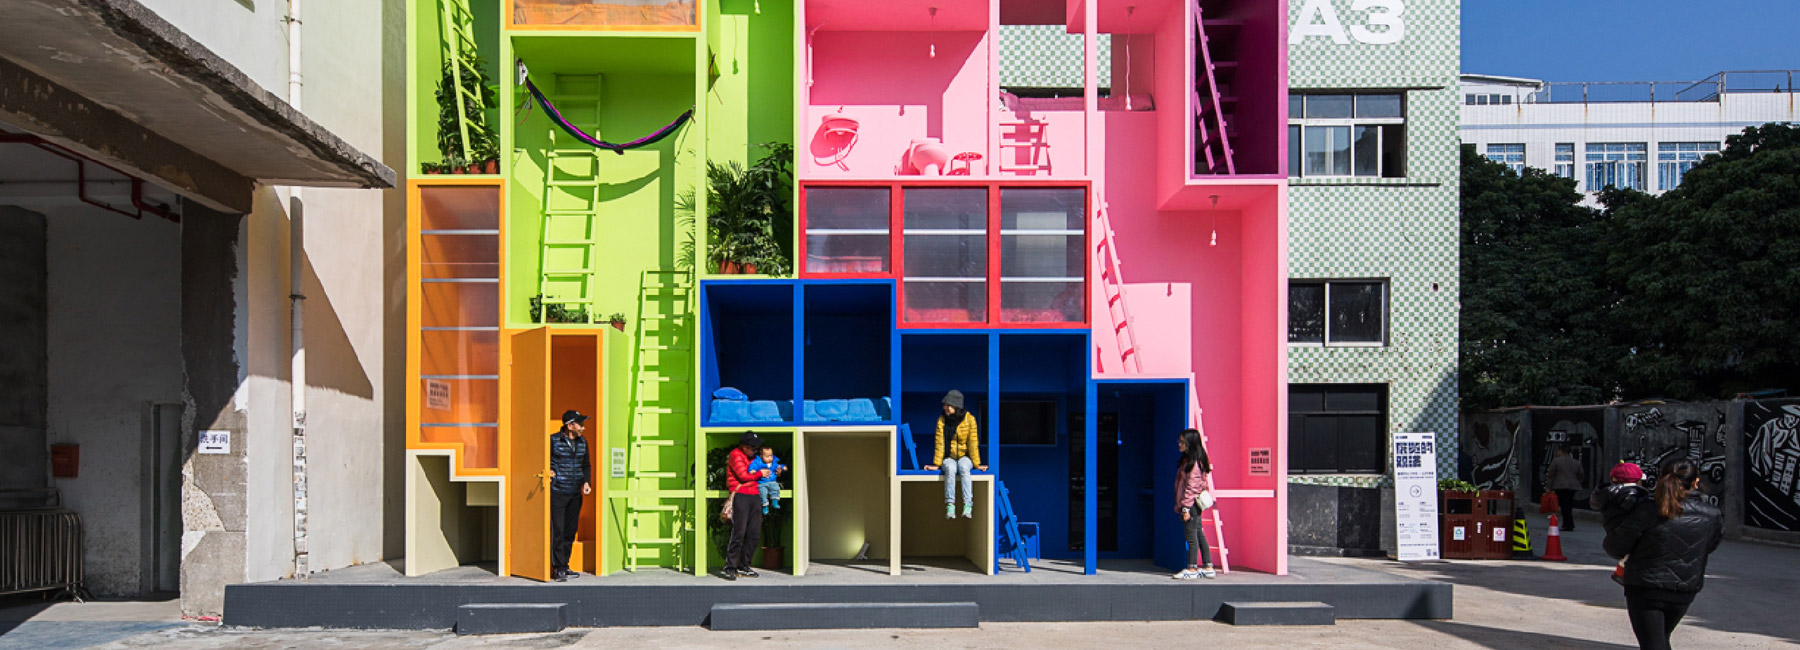 MVRDV's (W)ego house is a stackable hotel resolving the egoistic nature of urban cities